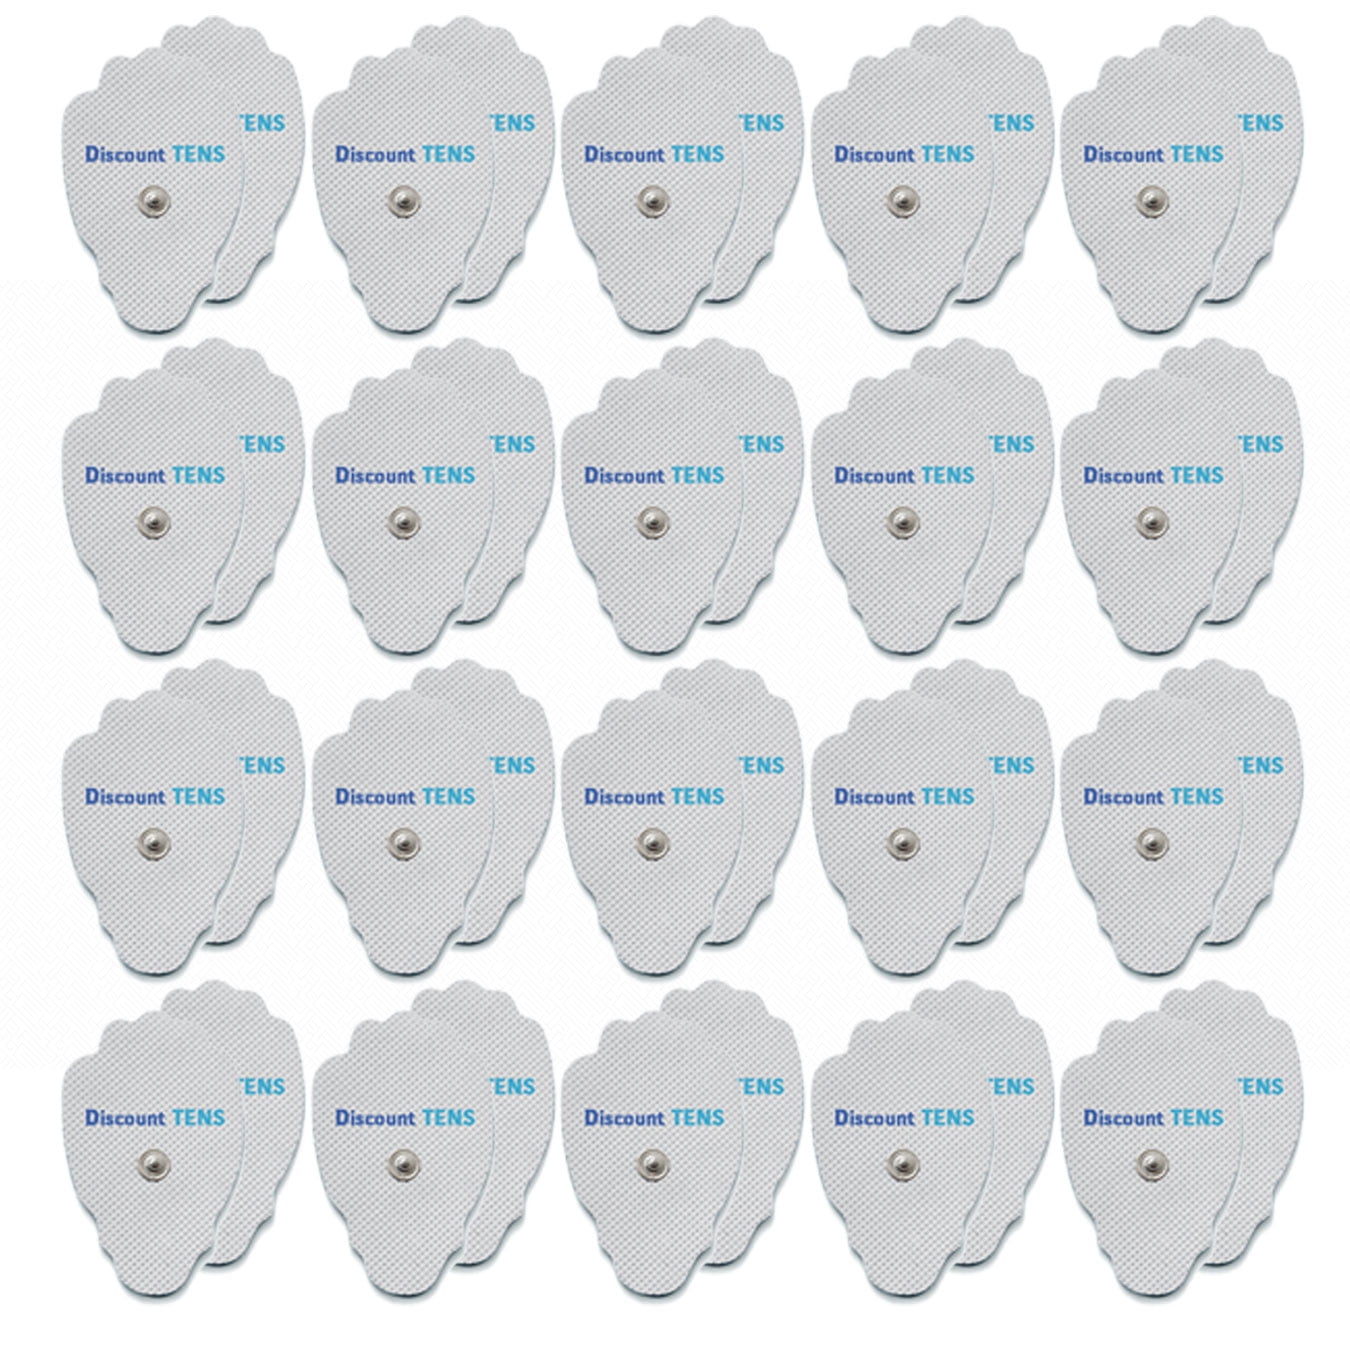 TENS Electrodes - Large Replacement Electrode Pads for TENS Units - 20 ...